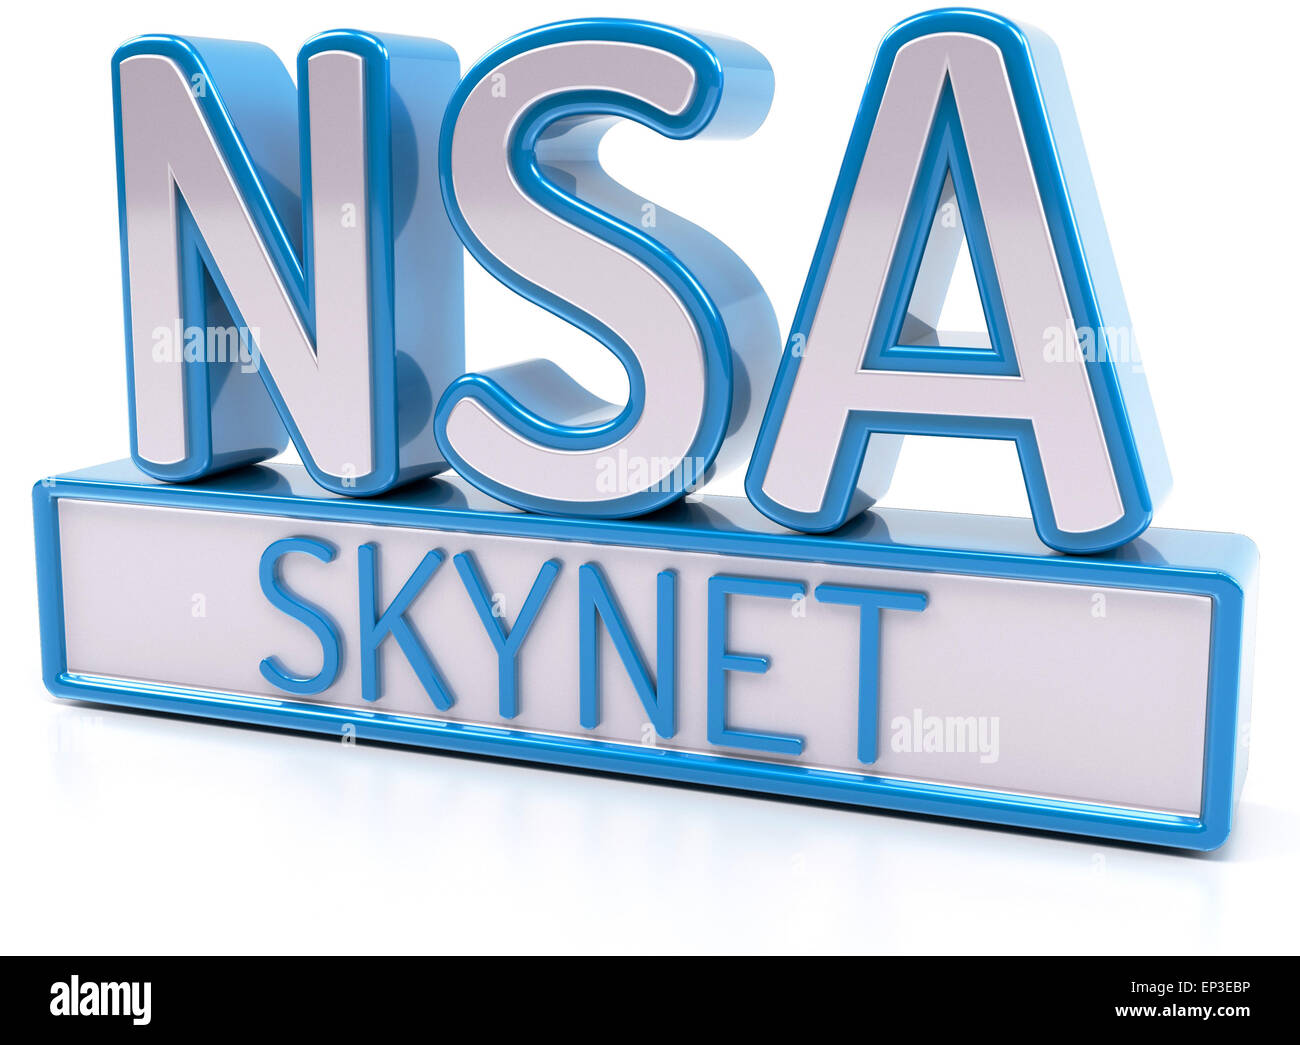 NSA National Security Agency - SKYNET Banque D'Images